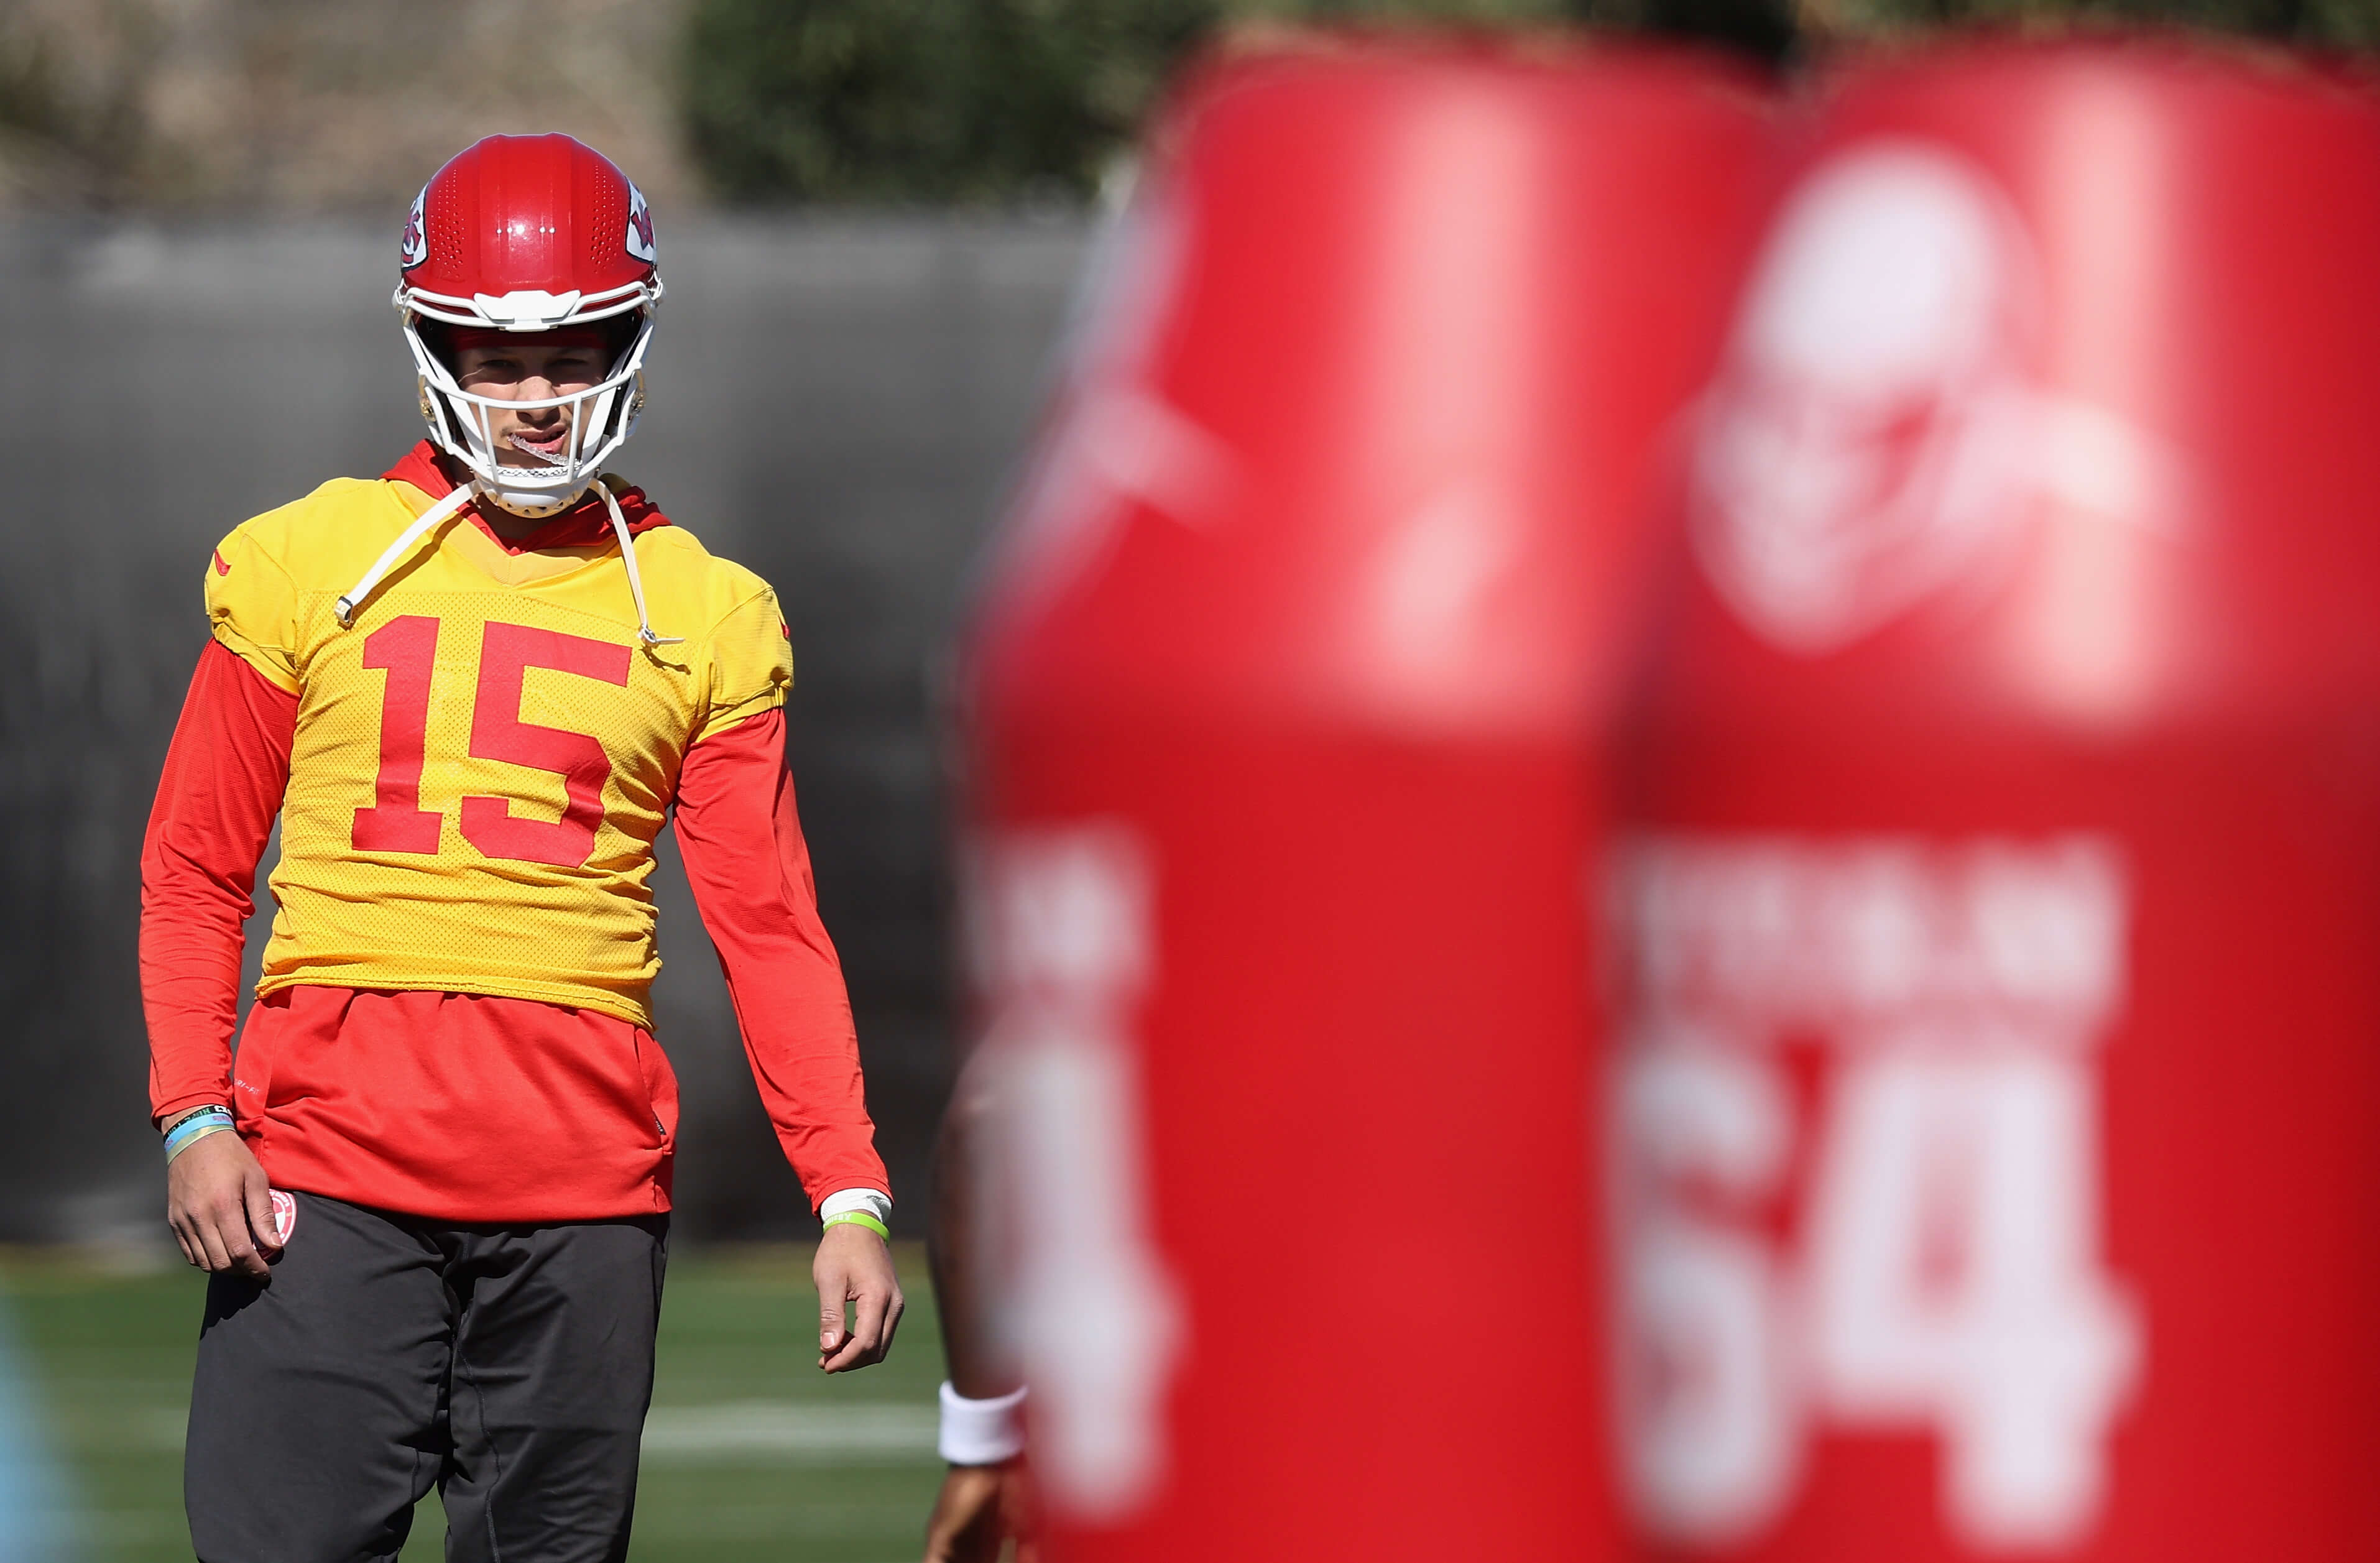 Patrick Mahomes of the Kansas City Chiefs participates in a practice.